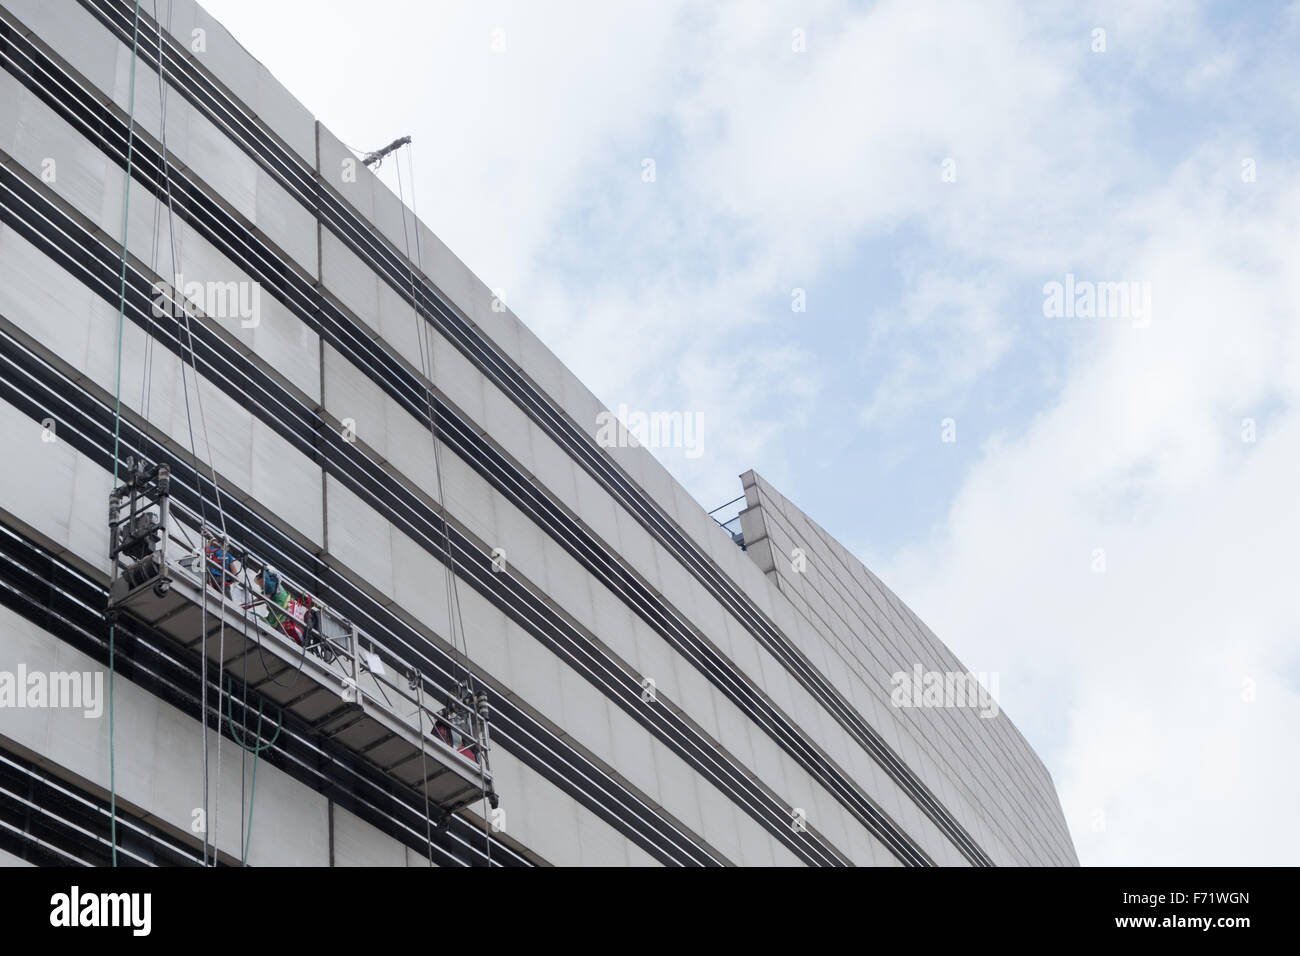 suspended window cleaning platform hong kong Stock Photo